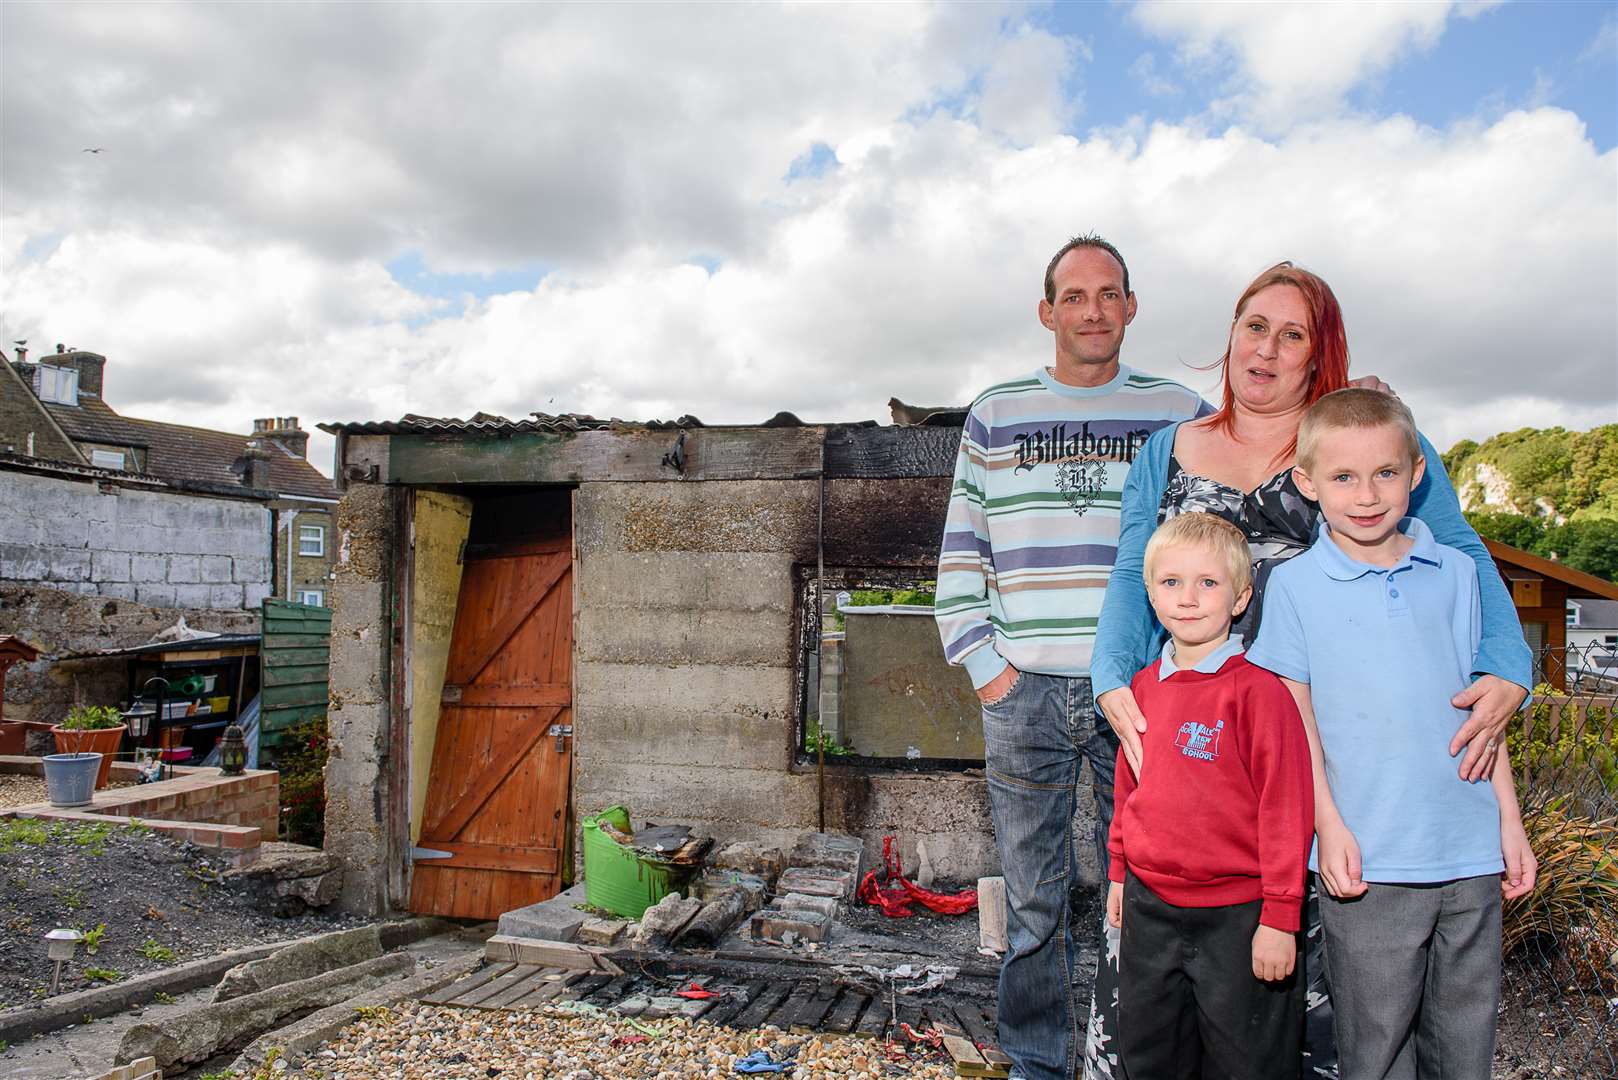 The family have been left devastated after the fire engulfed their garden